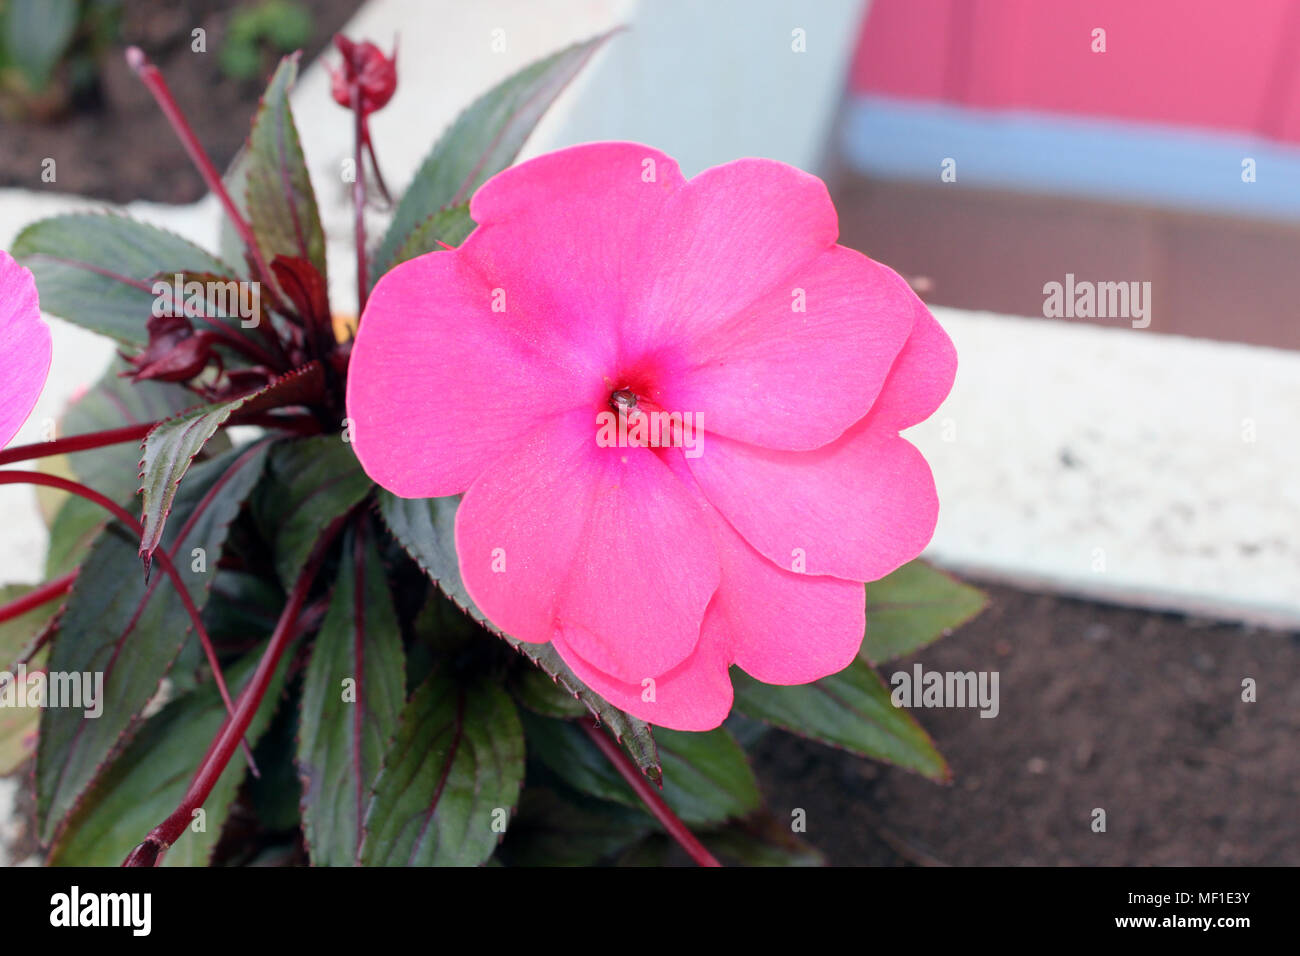 A tiny and pretty pink flower on the garden Stock Photo